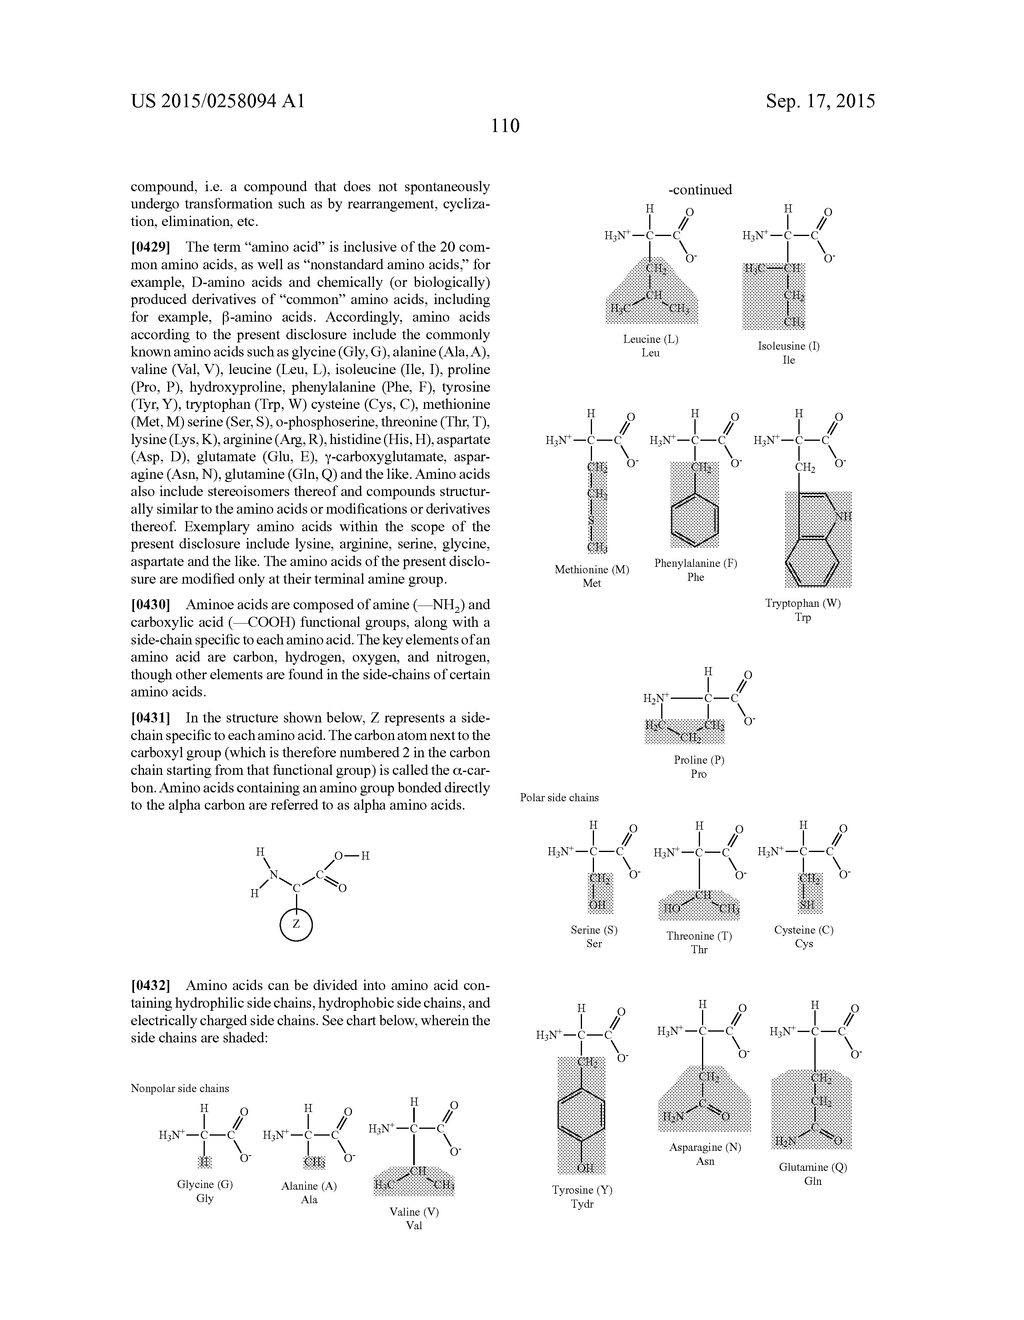 Nanocarriers And Their Processing For Diagnostics And Therapeutics - diagram, schematic, and image 170